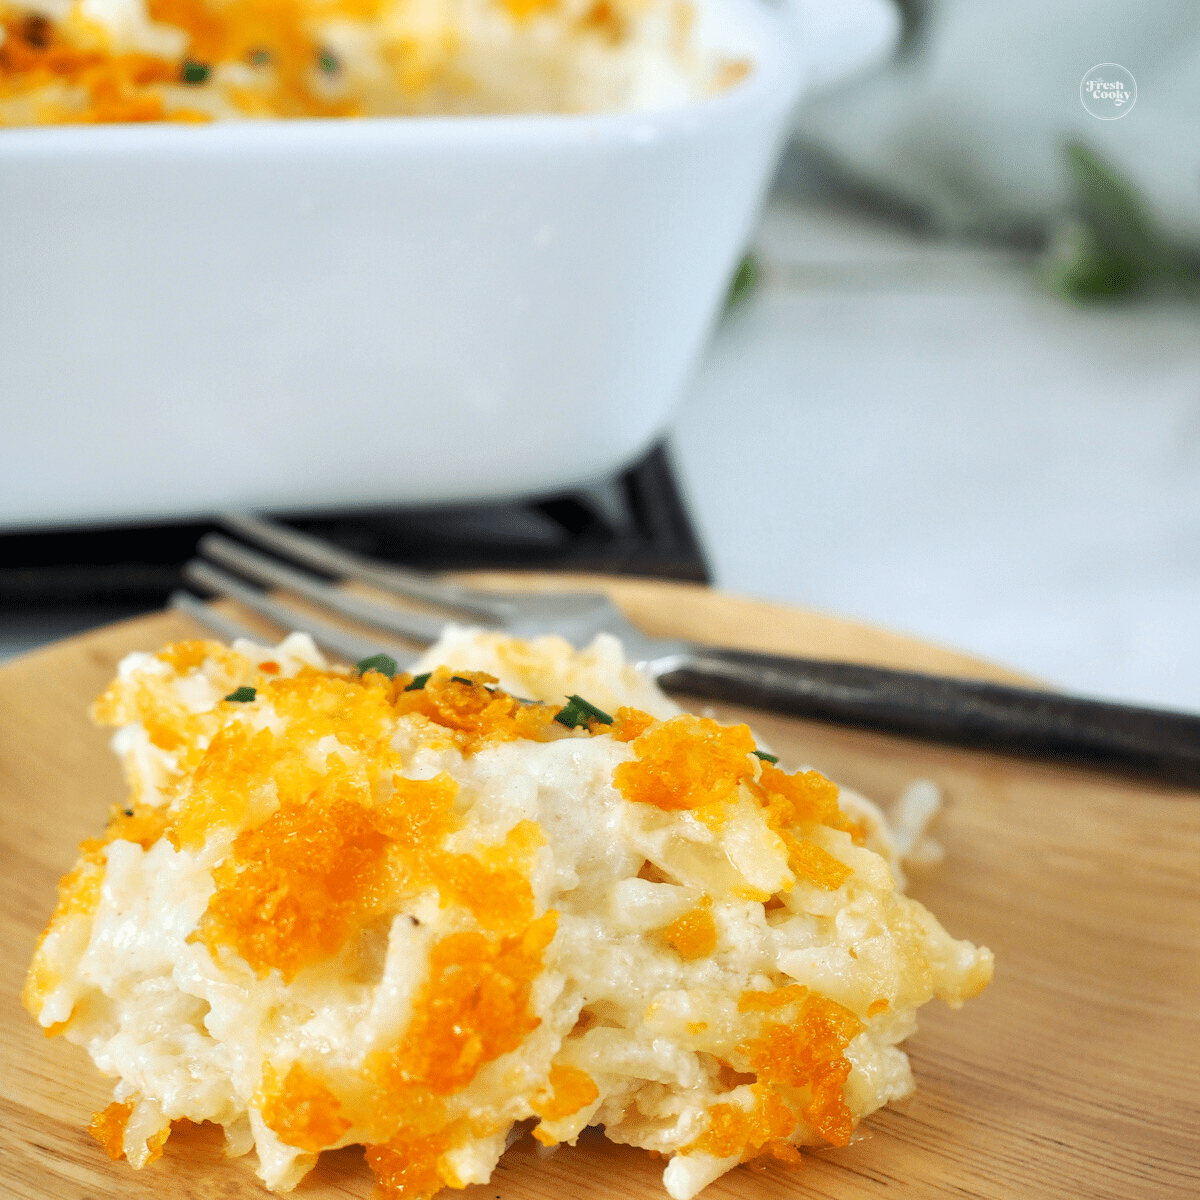 Cheesy hashbrown casserole recipe with corn flake topping.